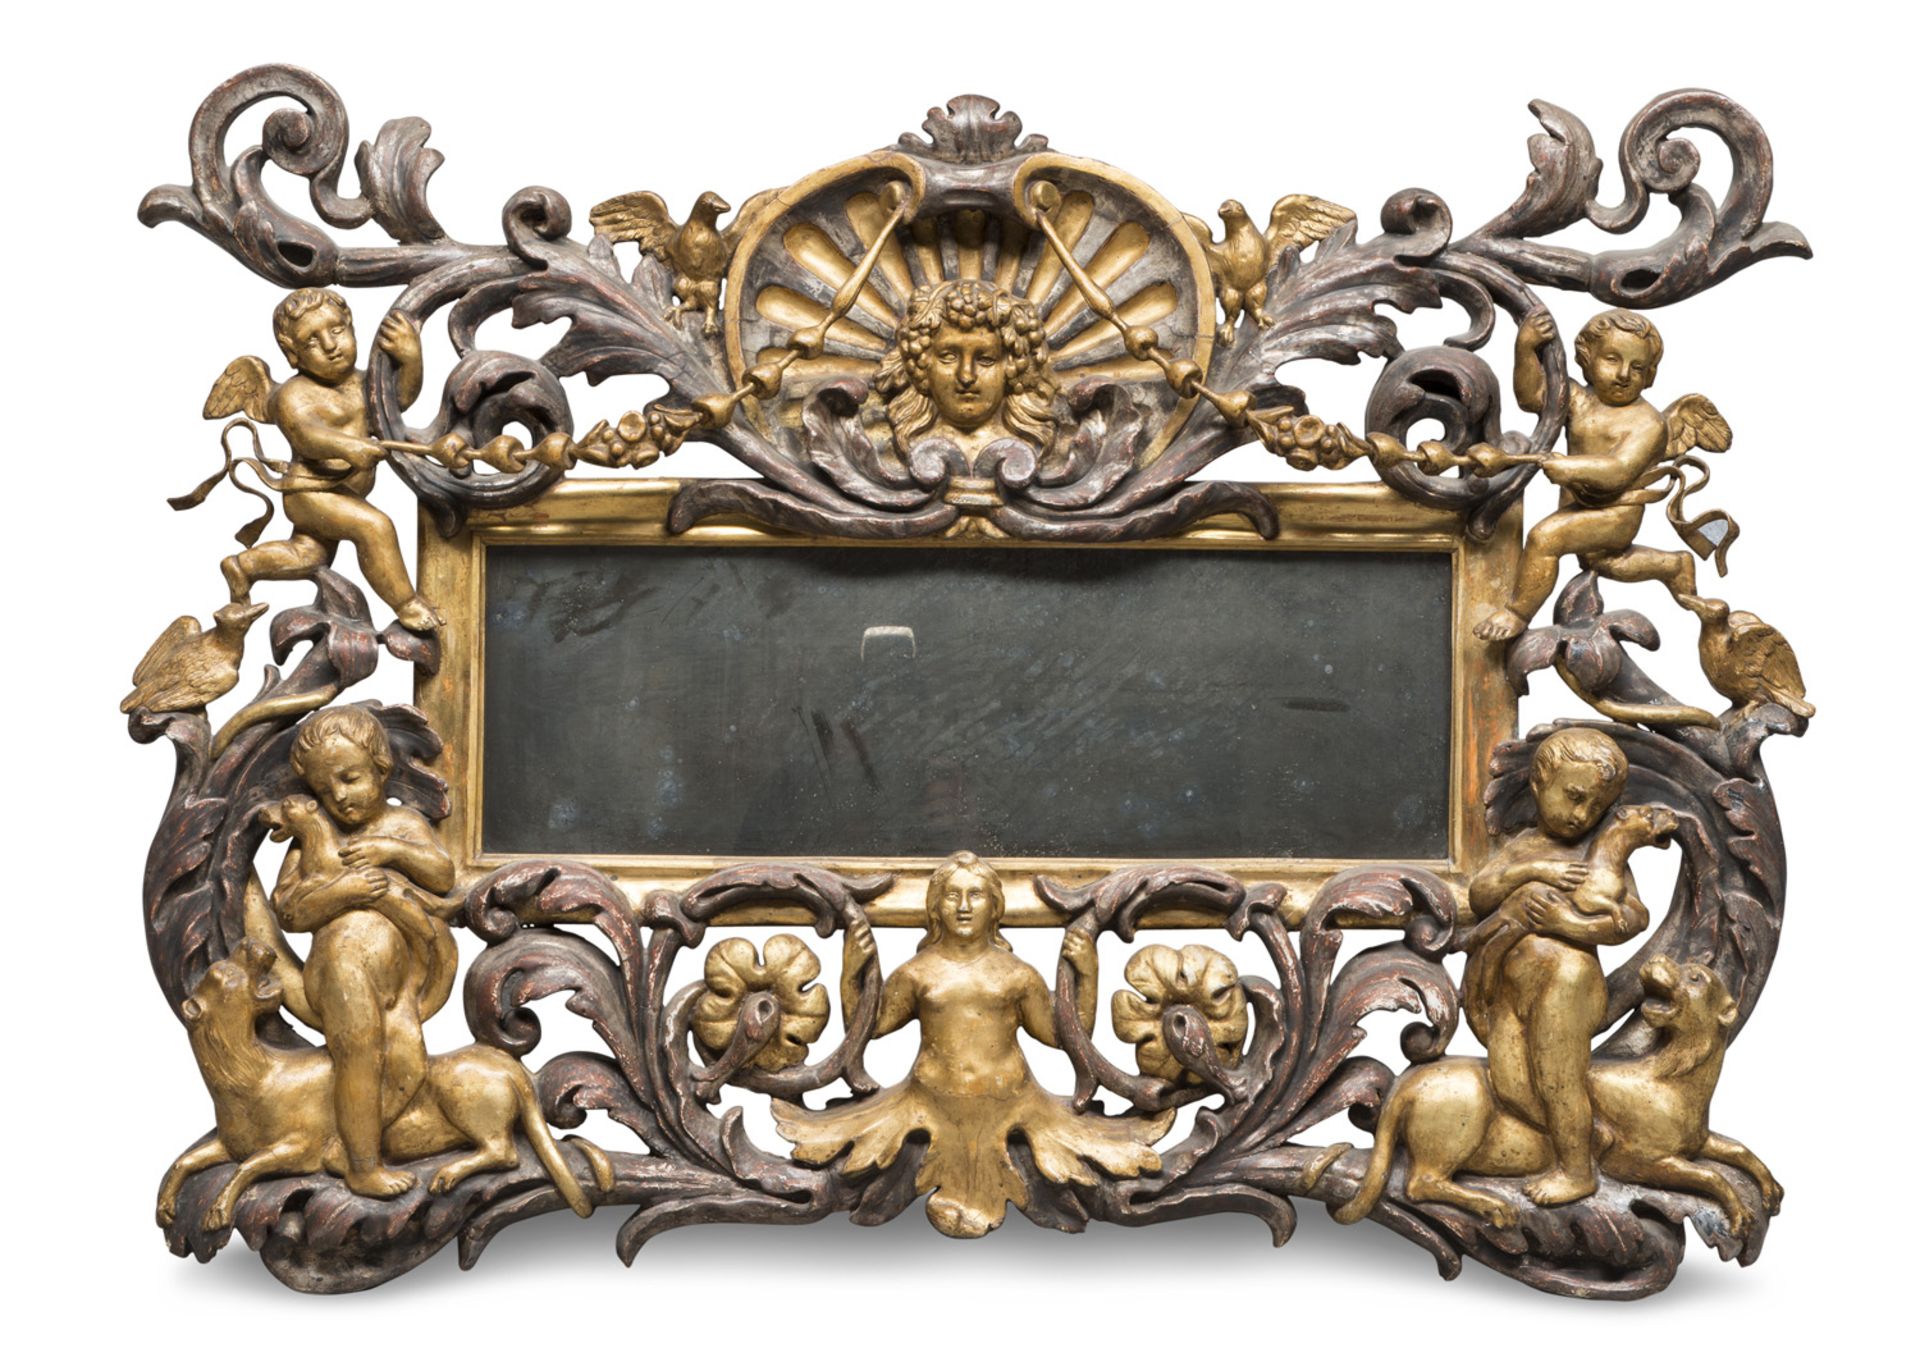 BEAUTIFUL MIRROR, ROME BAROQUE PERIODO silver-plated and gilded, with large frame graven to